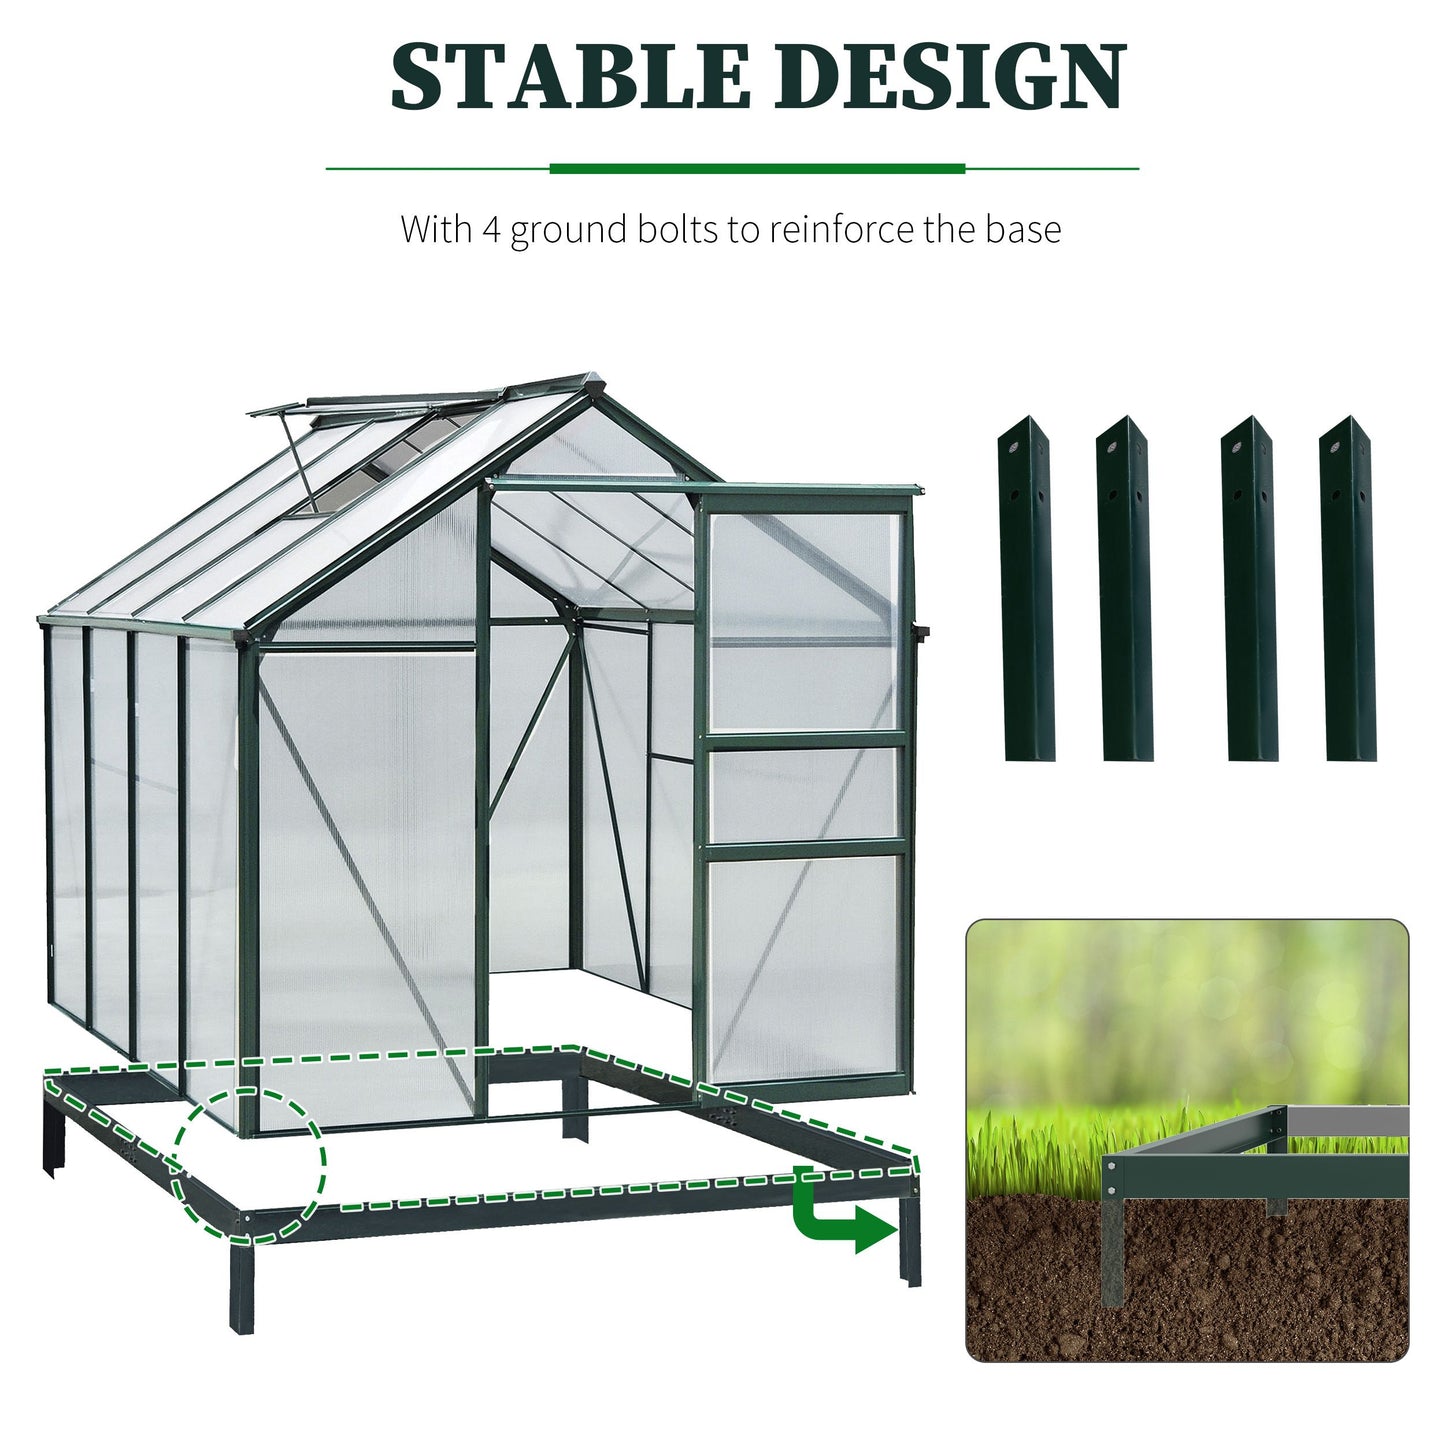 6.2' x 8.3' x 6.6' Clear Polycarbonate Greenhouse Large Walk-In Green House w/ Slide Door at Gallery Canada